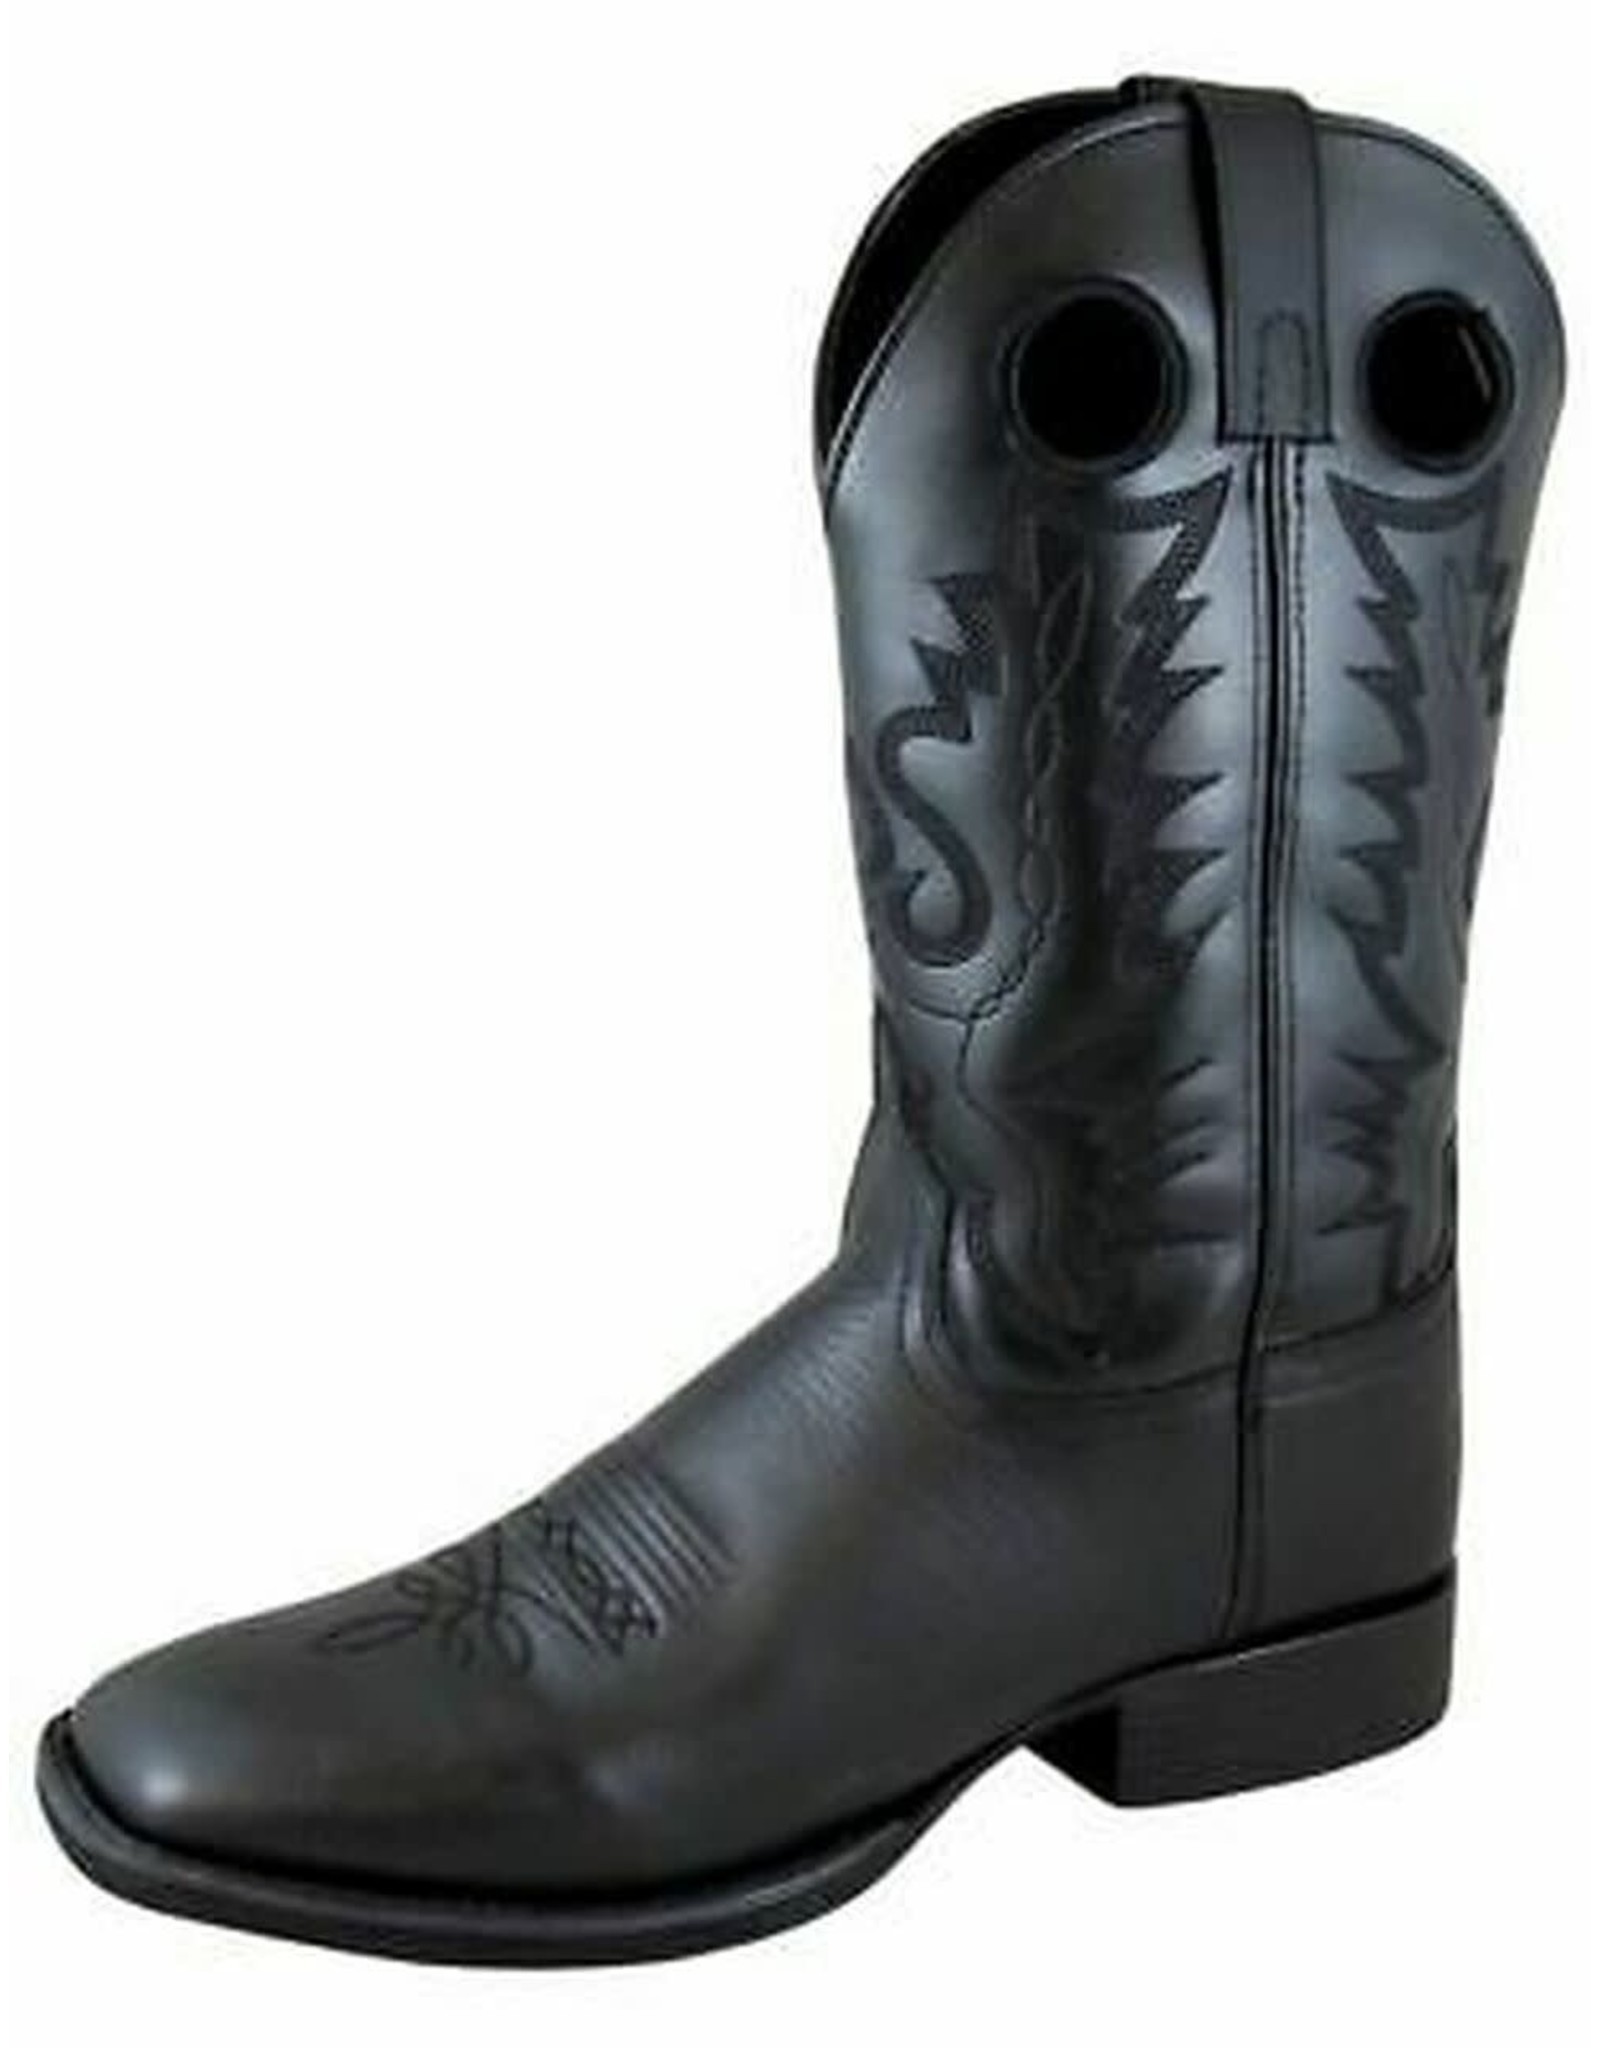 Smoky Mountain Men's Outlaw 4056 Western Boots